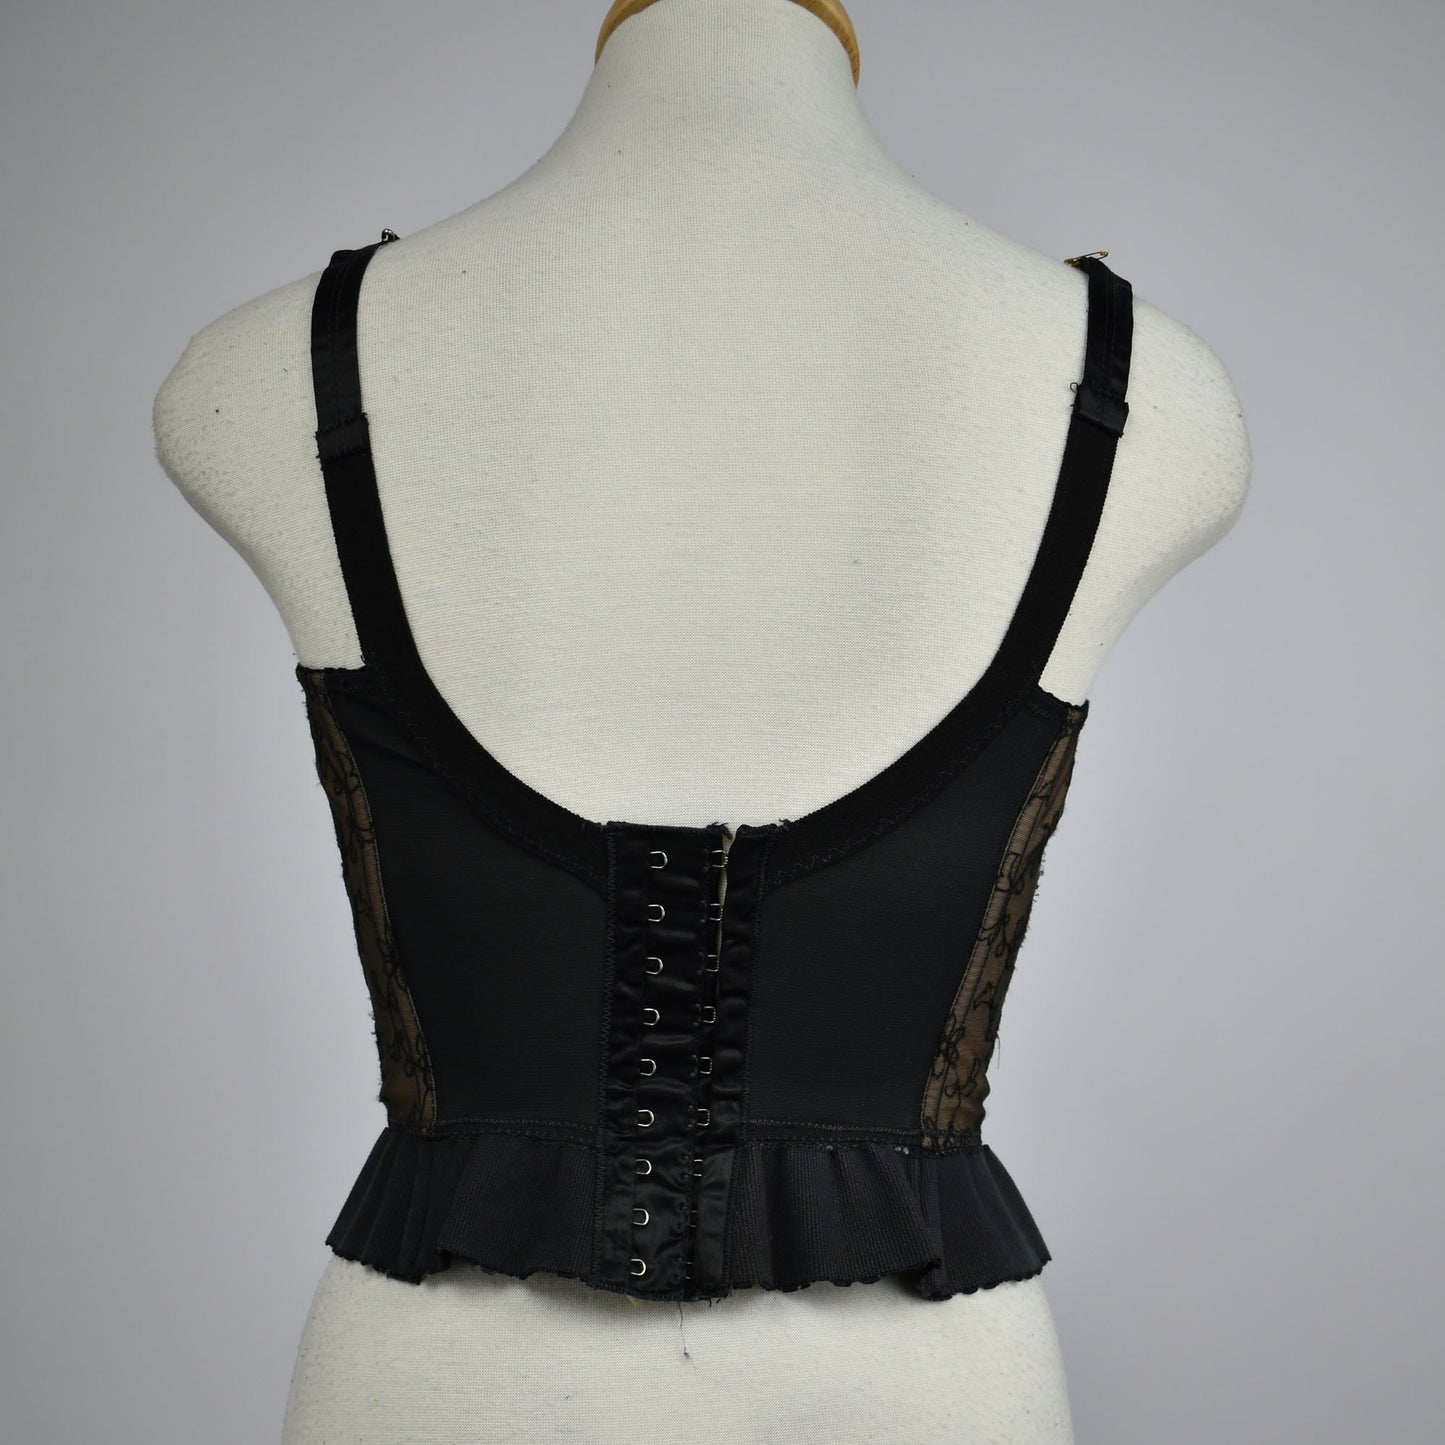 Vintage 1960's "Another Peter Pan Look Fashion" Bustier Inspired By Oleg Cassini Black and Nude with Embroidered Floral Mesh Detail